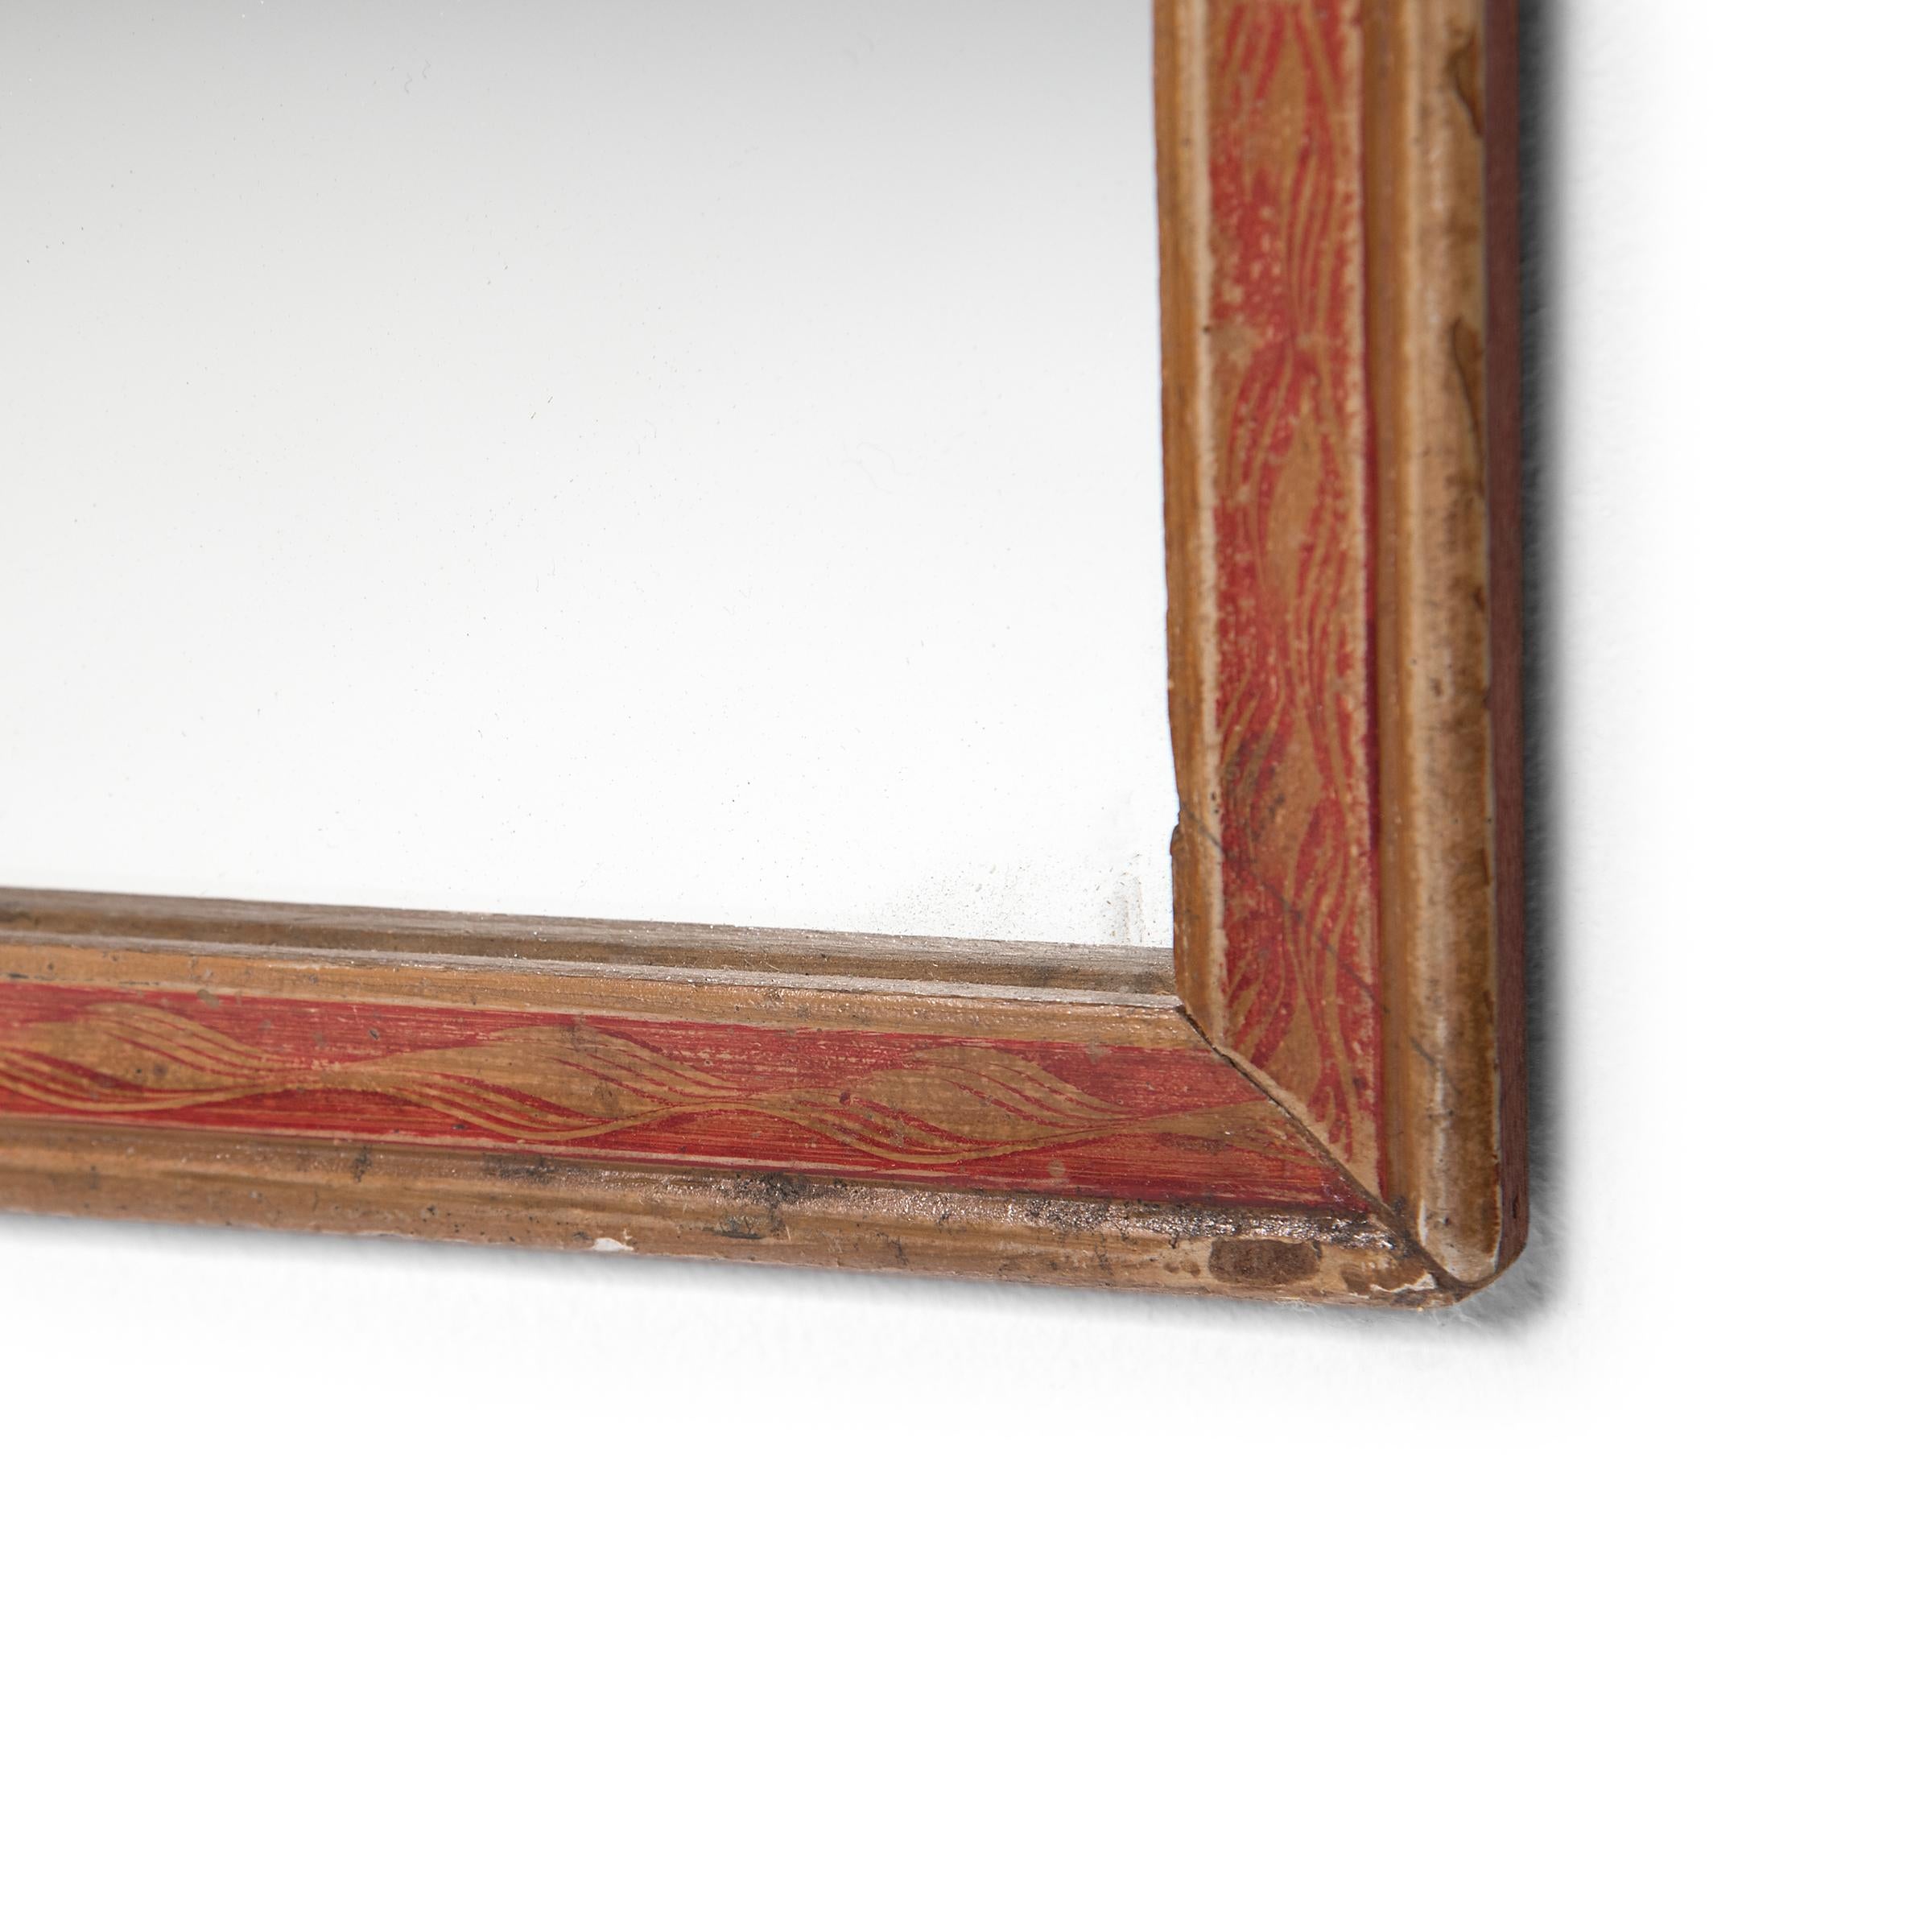 The painted frame of this wall mirror originally bordered a reverse glass painting, a traditional art that required the artist to paint an image in reverse, beginning with the details. Now enclosing a new mirror, the frame is painted with a